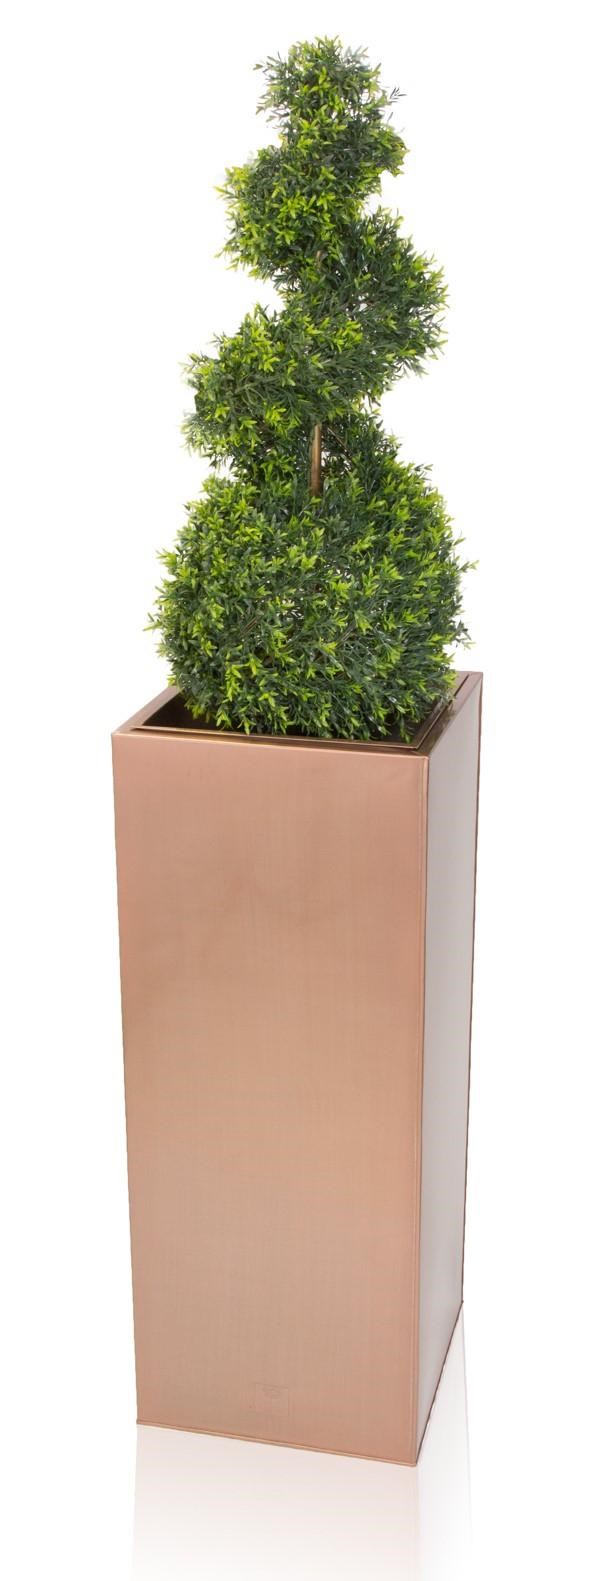 H100cm Zinc Galvanised Tall Copper Planter With Insert - By Primrose™